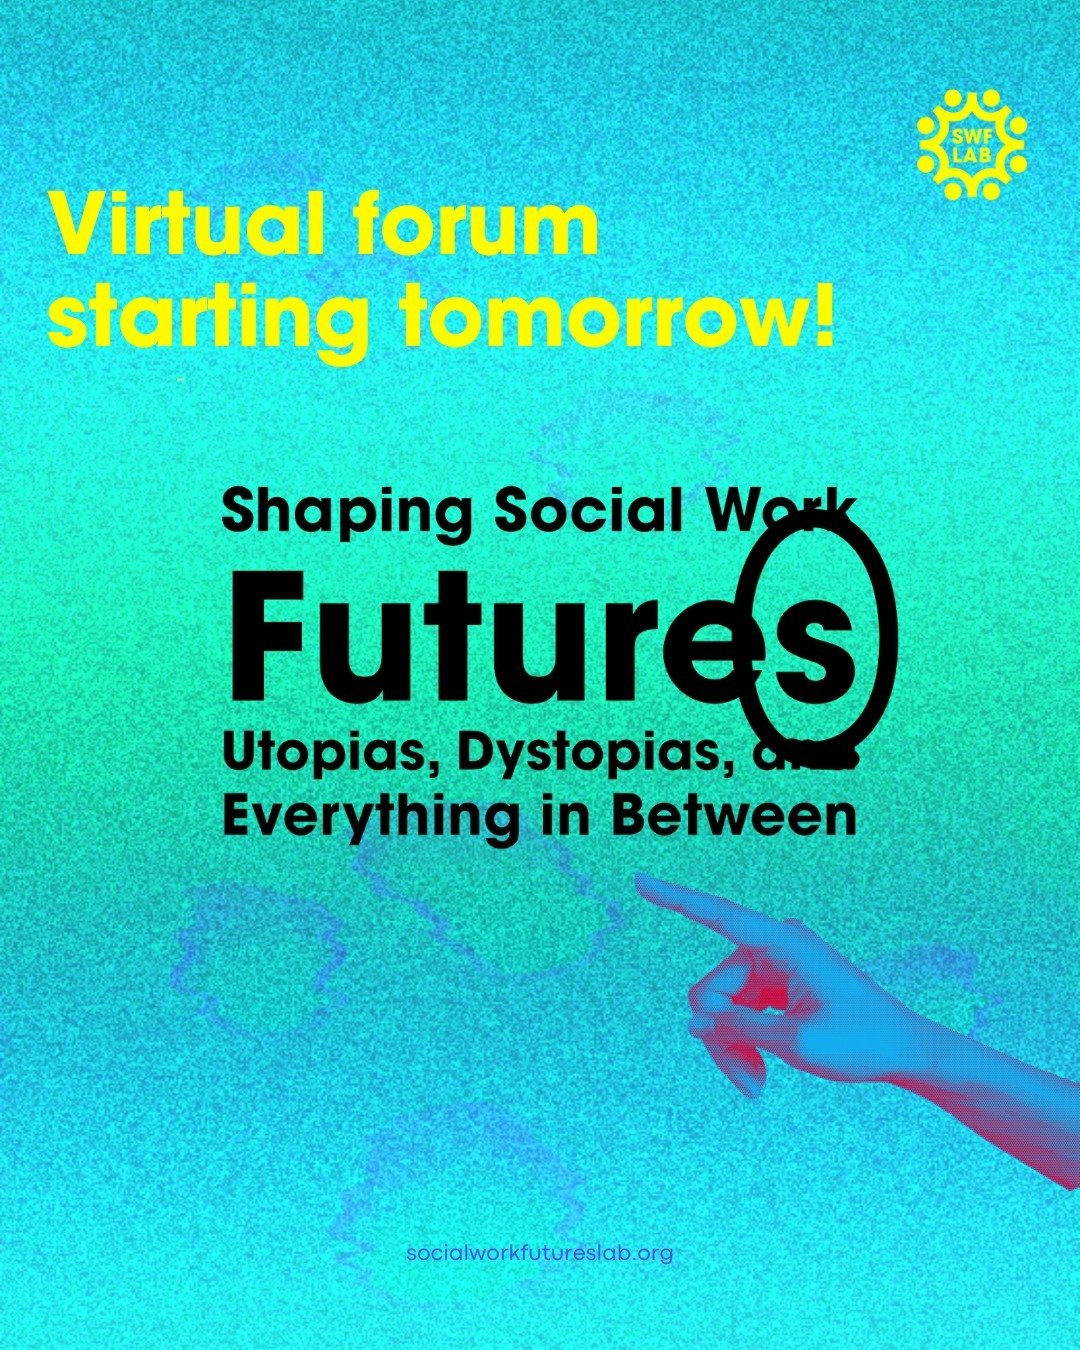 Our virtual forum starts tomorrow! Follow our and use our hashtag #SWFuturesForum2024 to stay up to date!